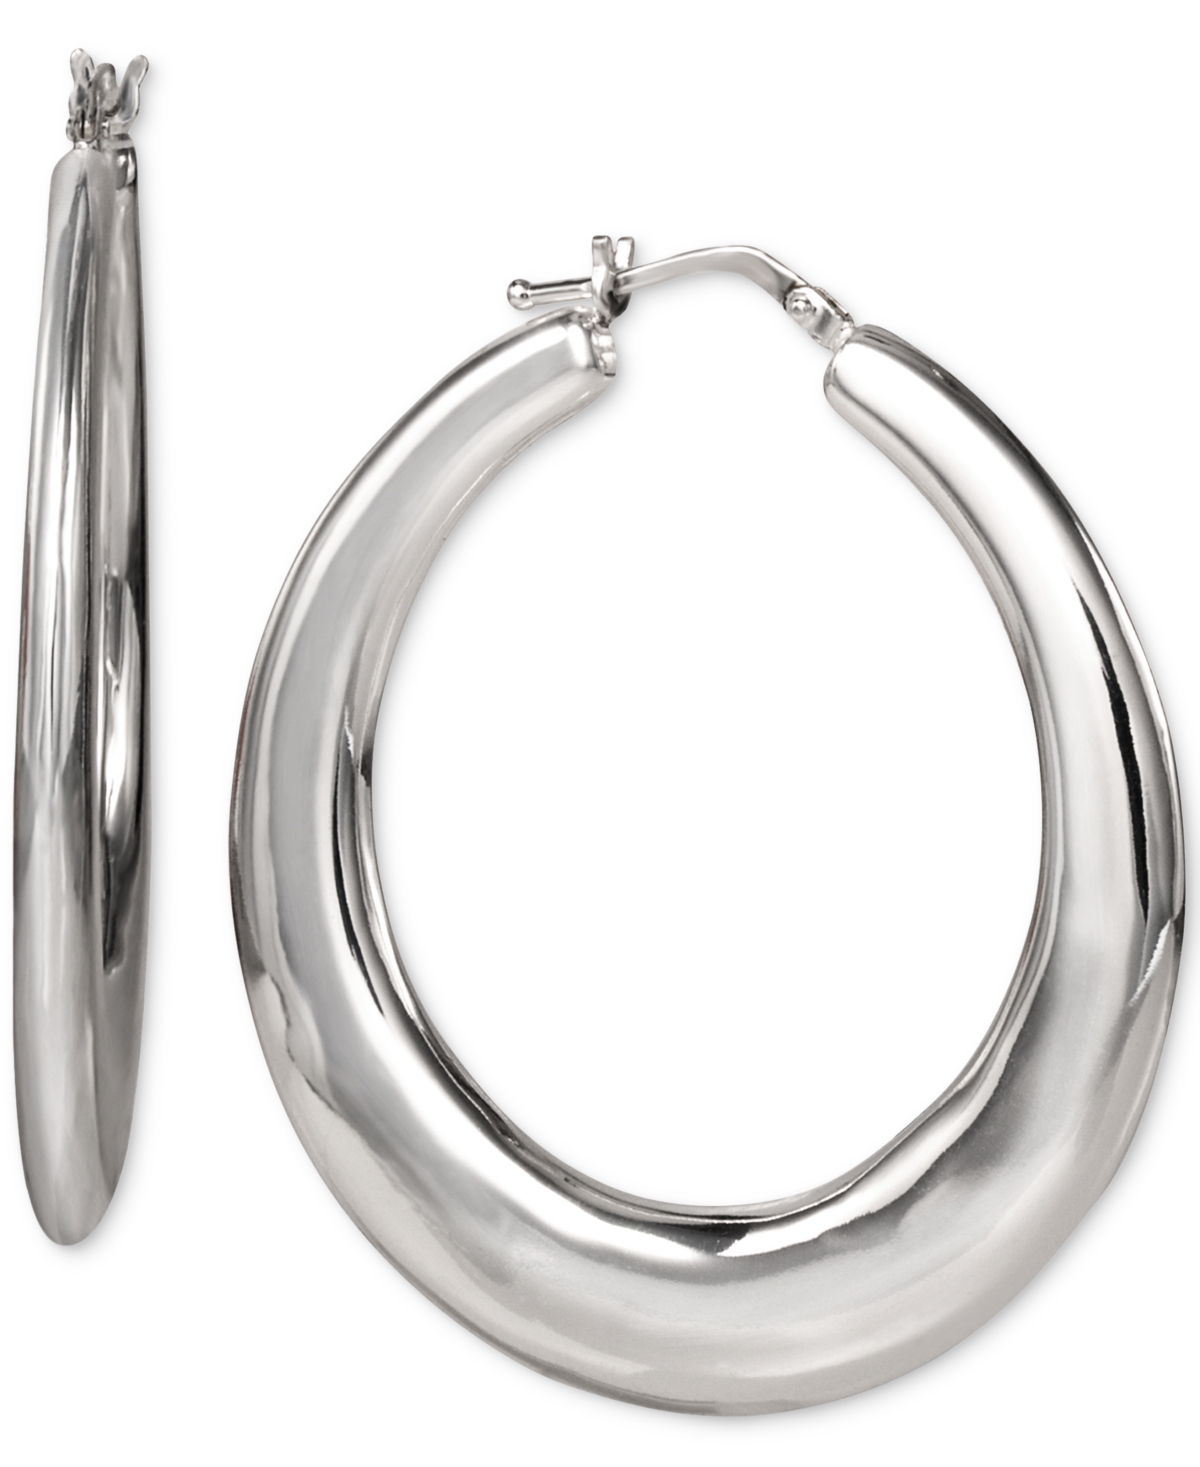 Polished Graduated Oval Medium Hoop Earrings in Sterling Silver, Created for Macy's - Silver